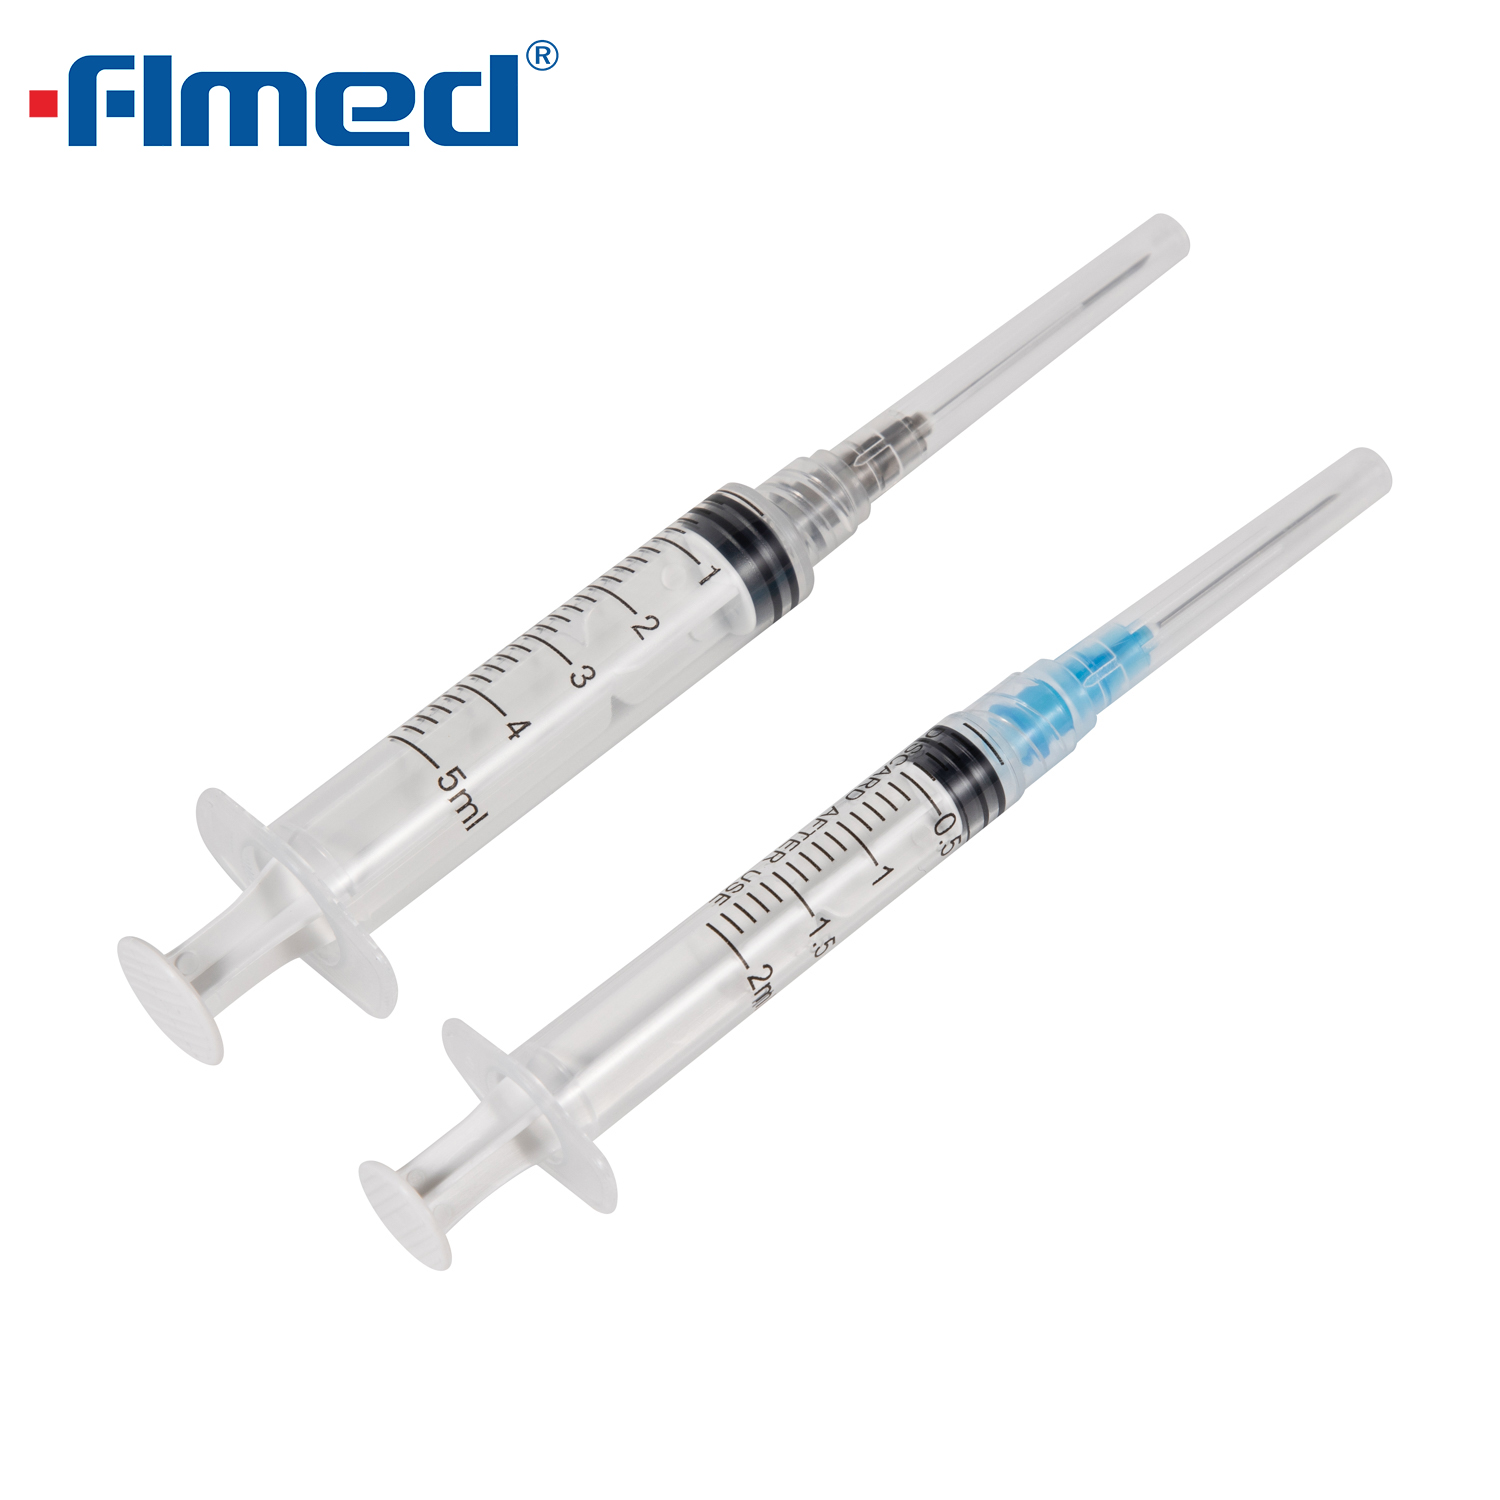 3-part Disposable Syringes with Needles 100PCS/Box